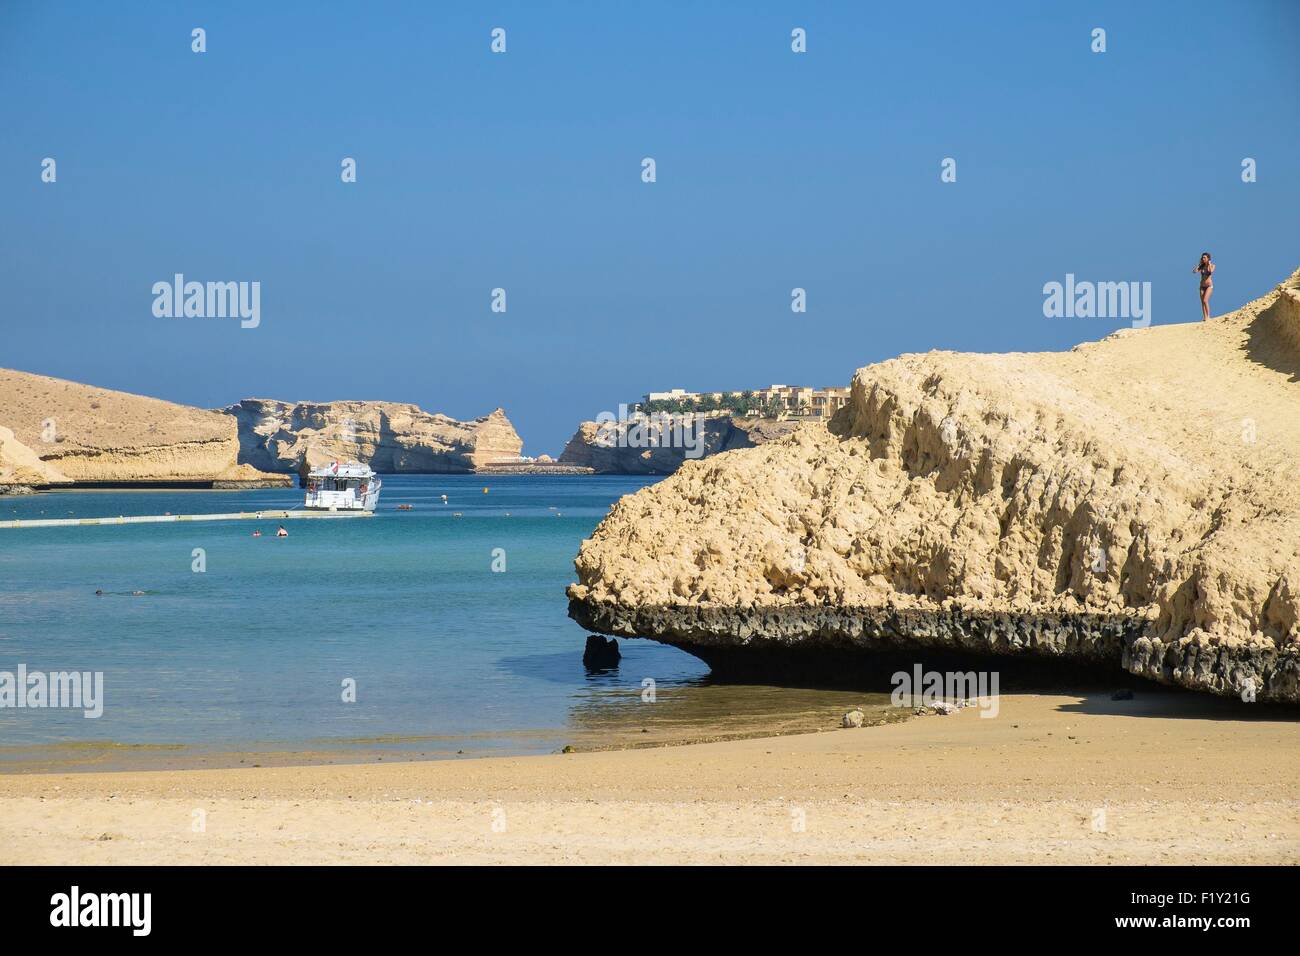 Sultanate of Oman, gouvernorate of Mascate, Bandar Jissah, the beach of the Oman Dive Centre Stock Photo